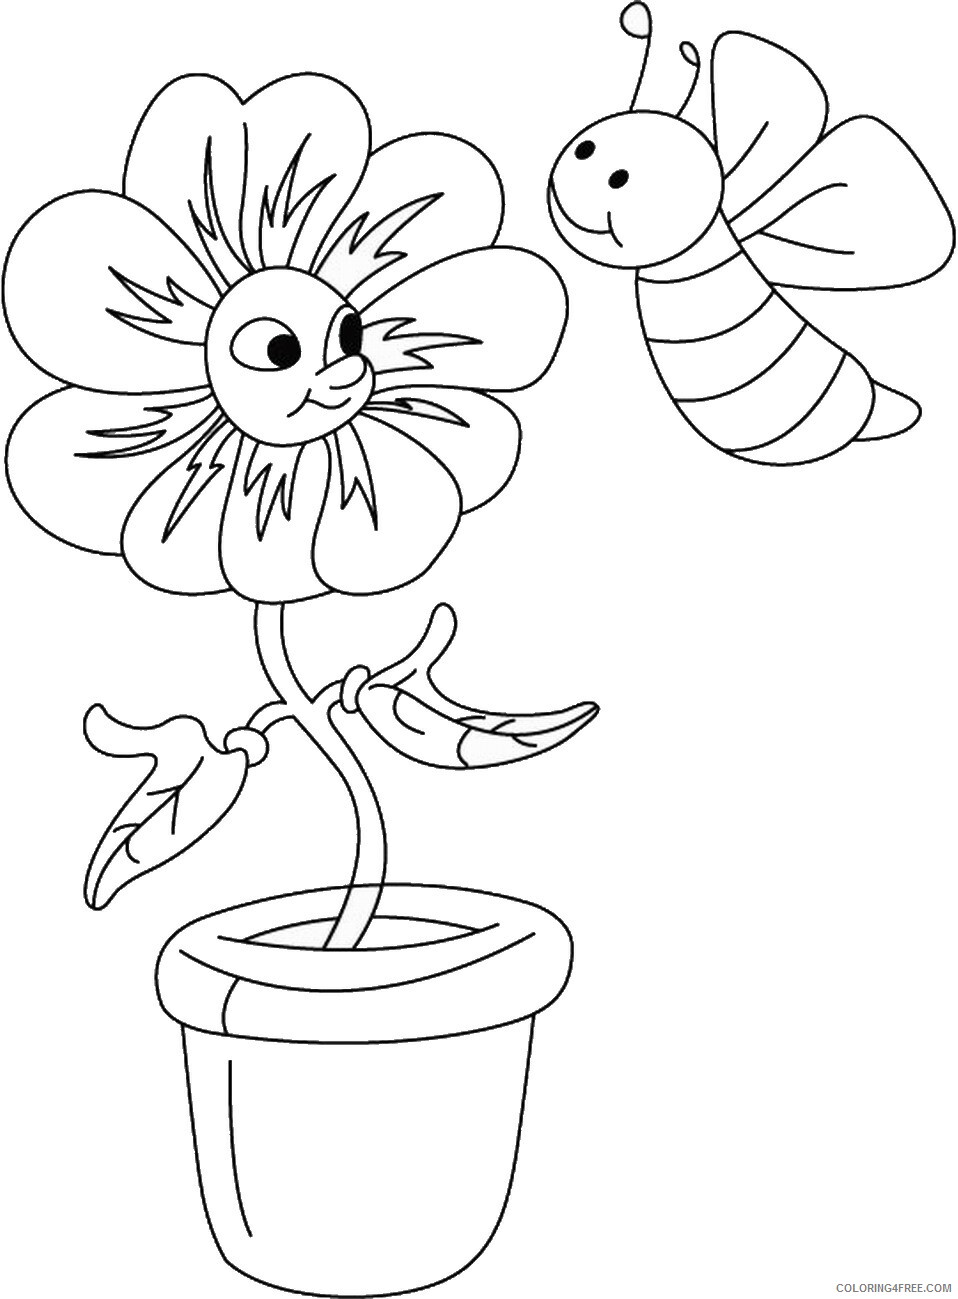 Bee Coloring Pages Animal Printable Sheets bee_cl_23 2021 0371 Coloring4free